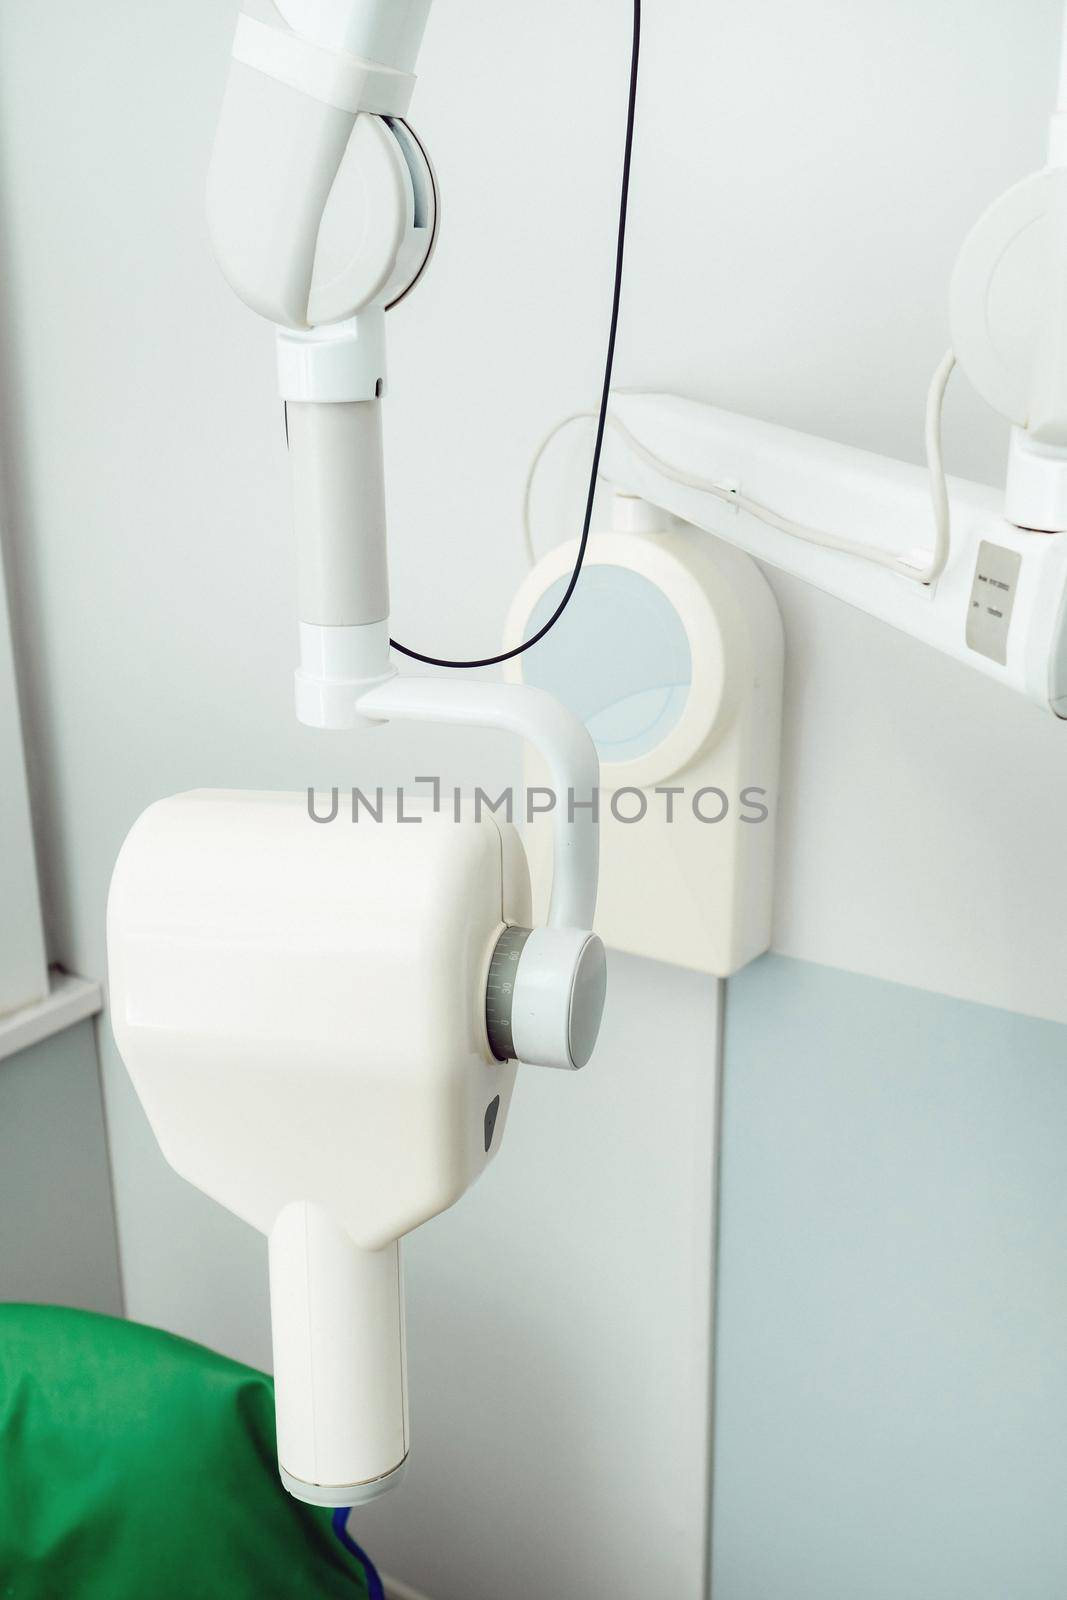 Equipment in the X-ray dental office in the hospital.